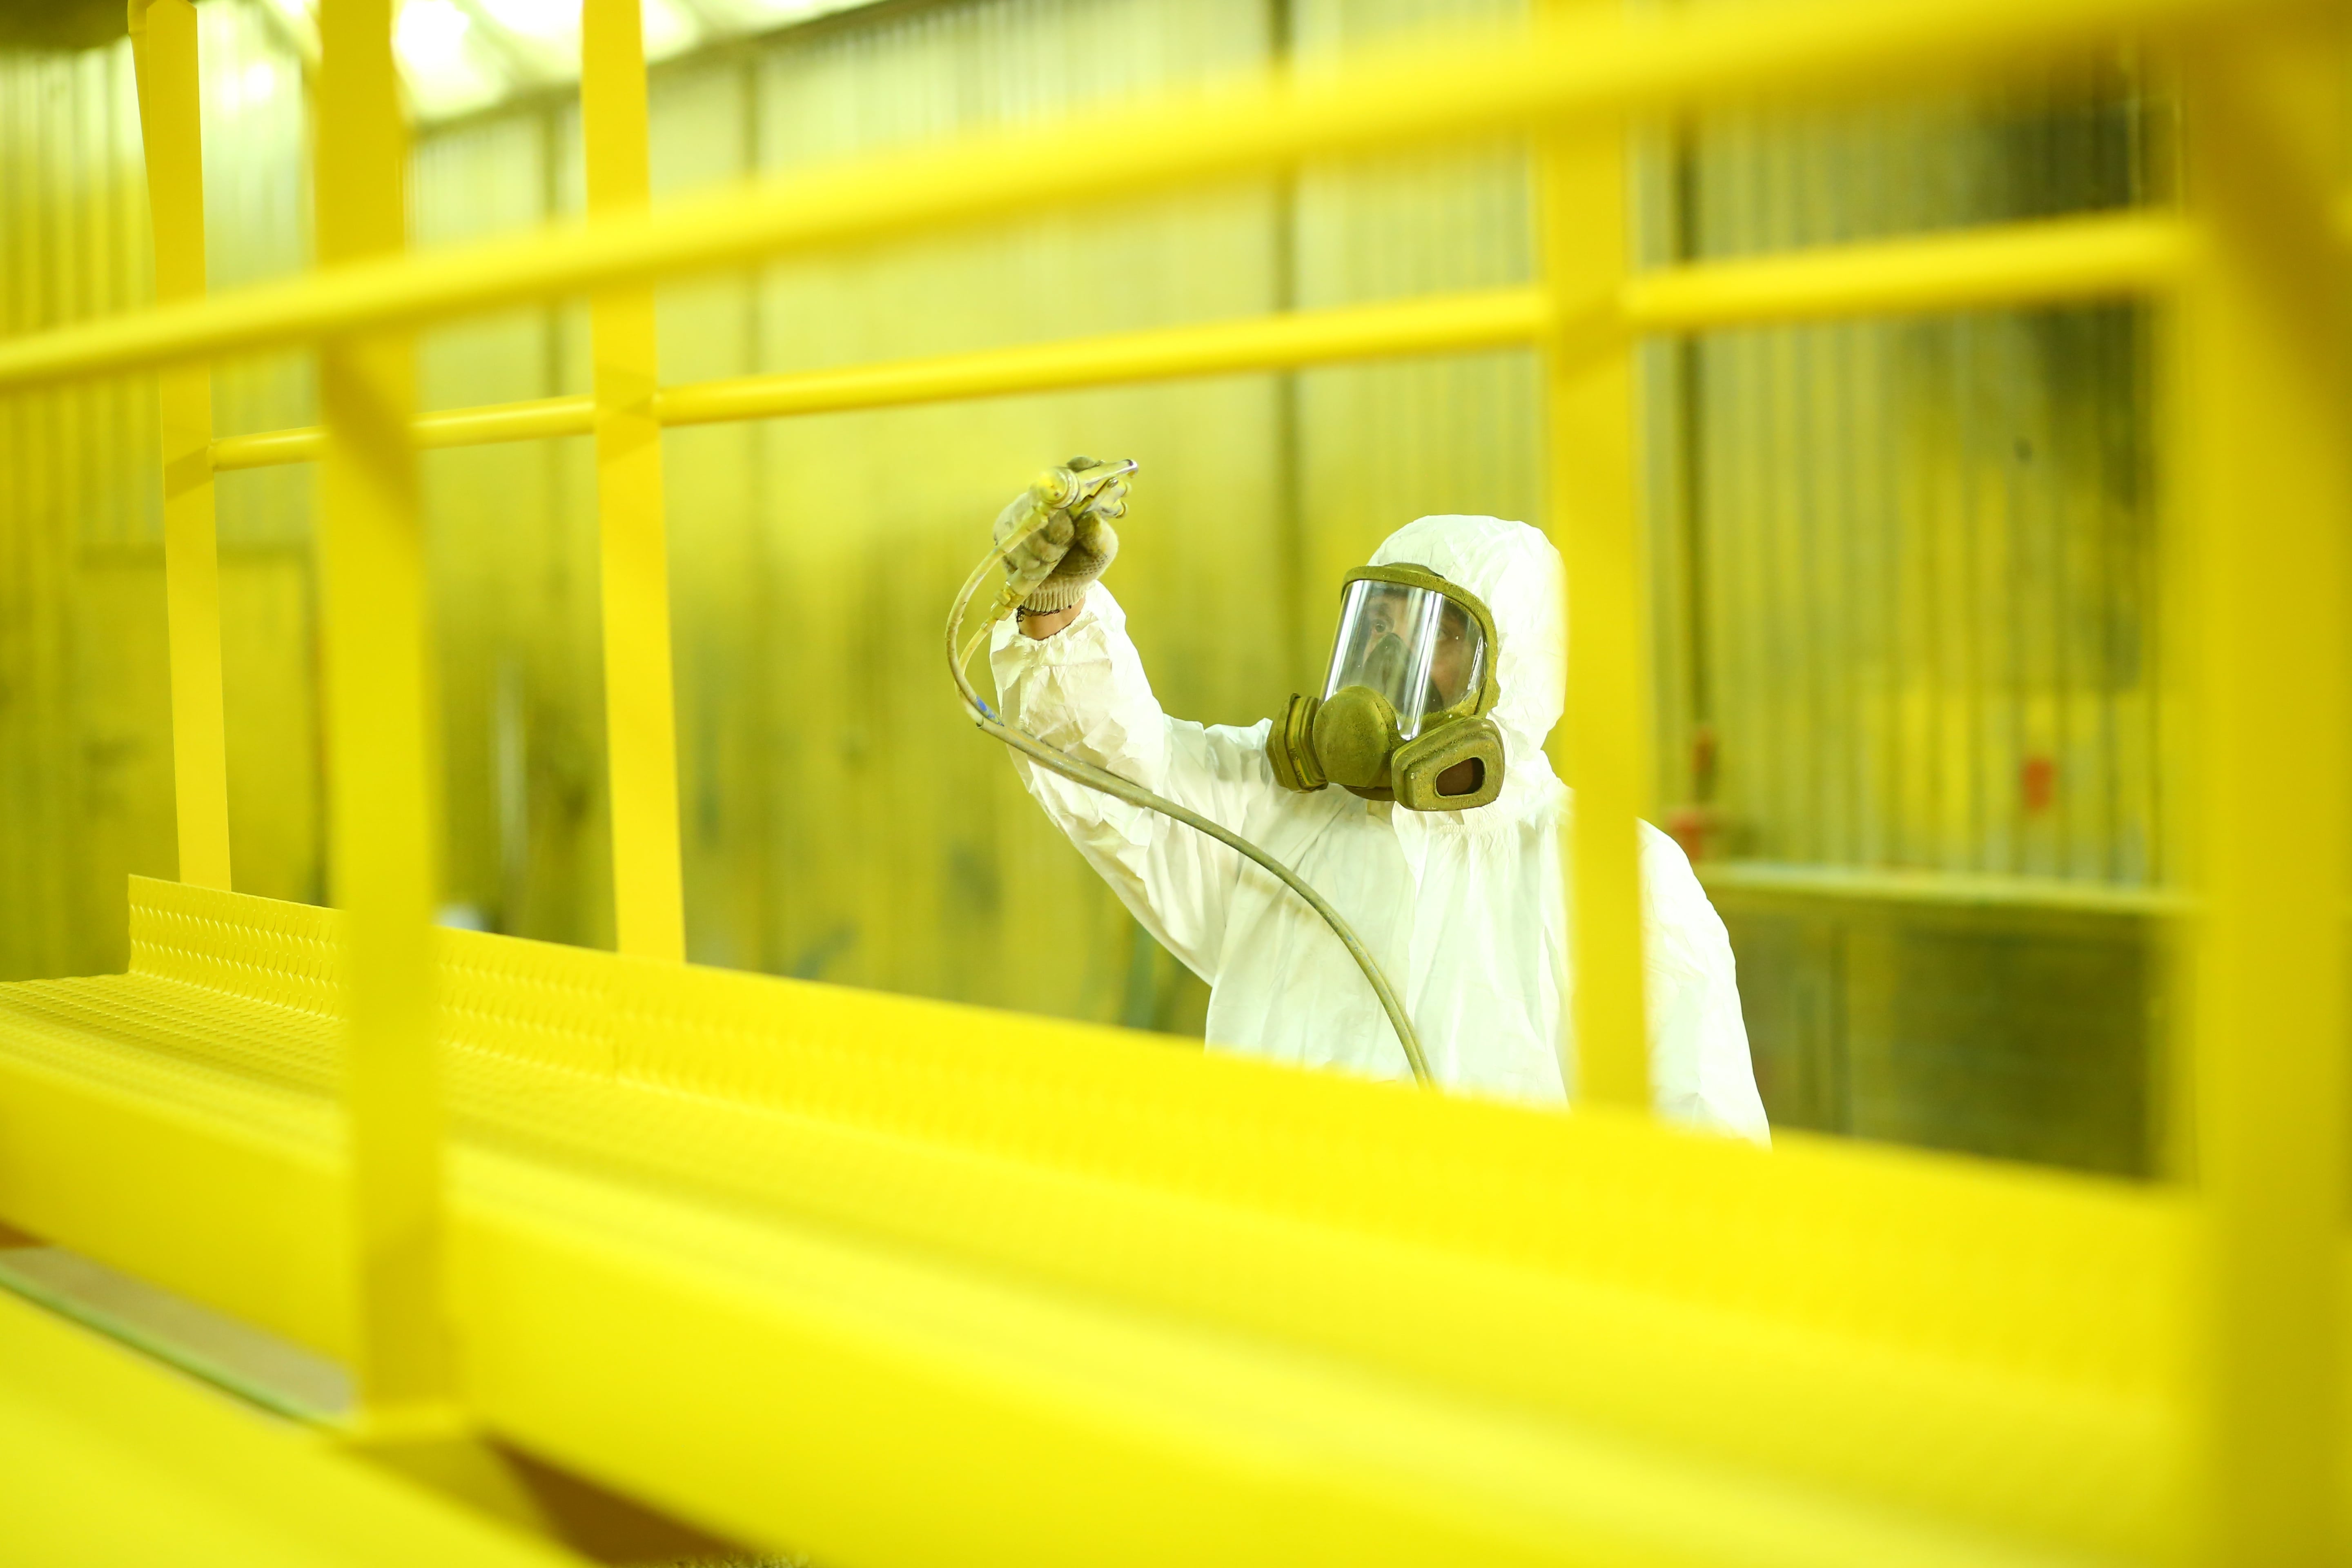 A man wearing a hazmat suit spray painting a sign as part of manufacturing process for signage creation and installation